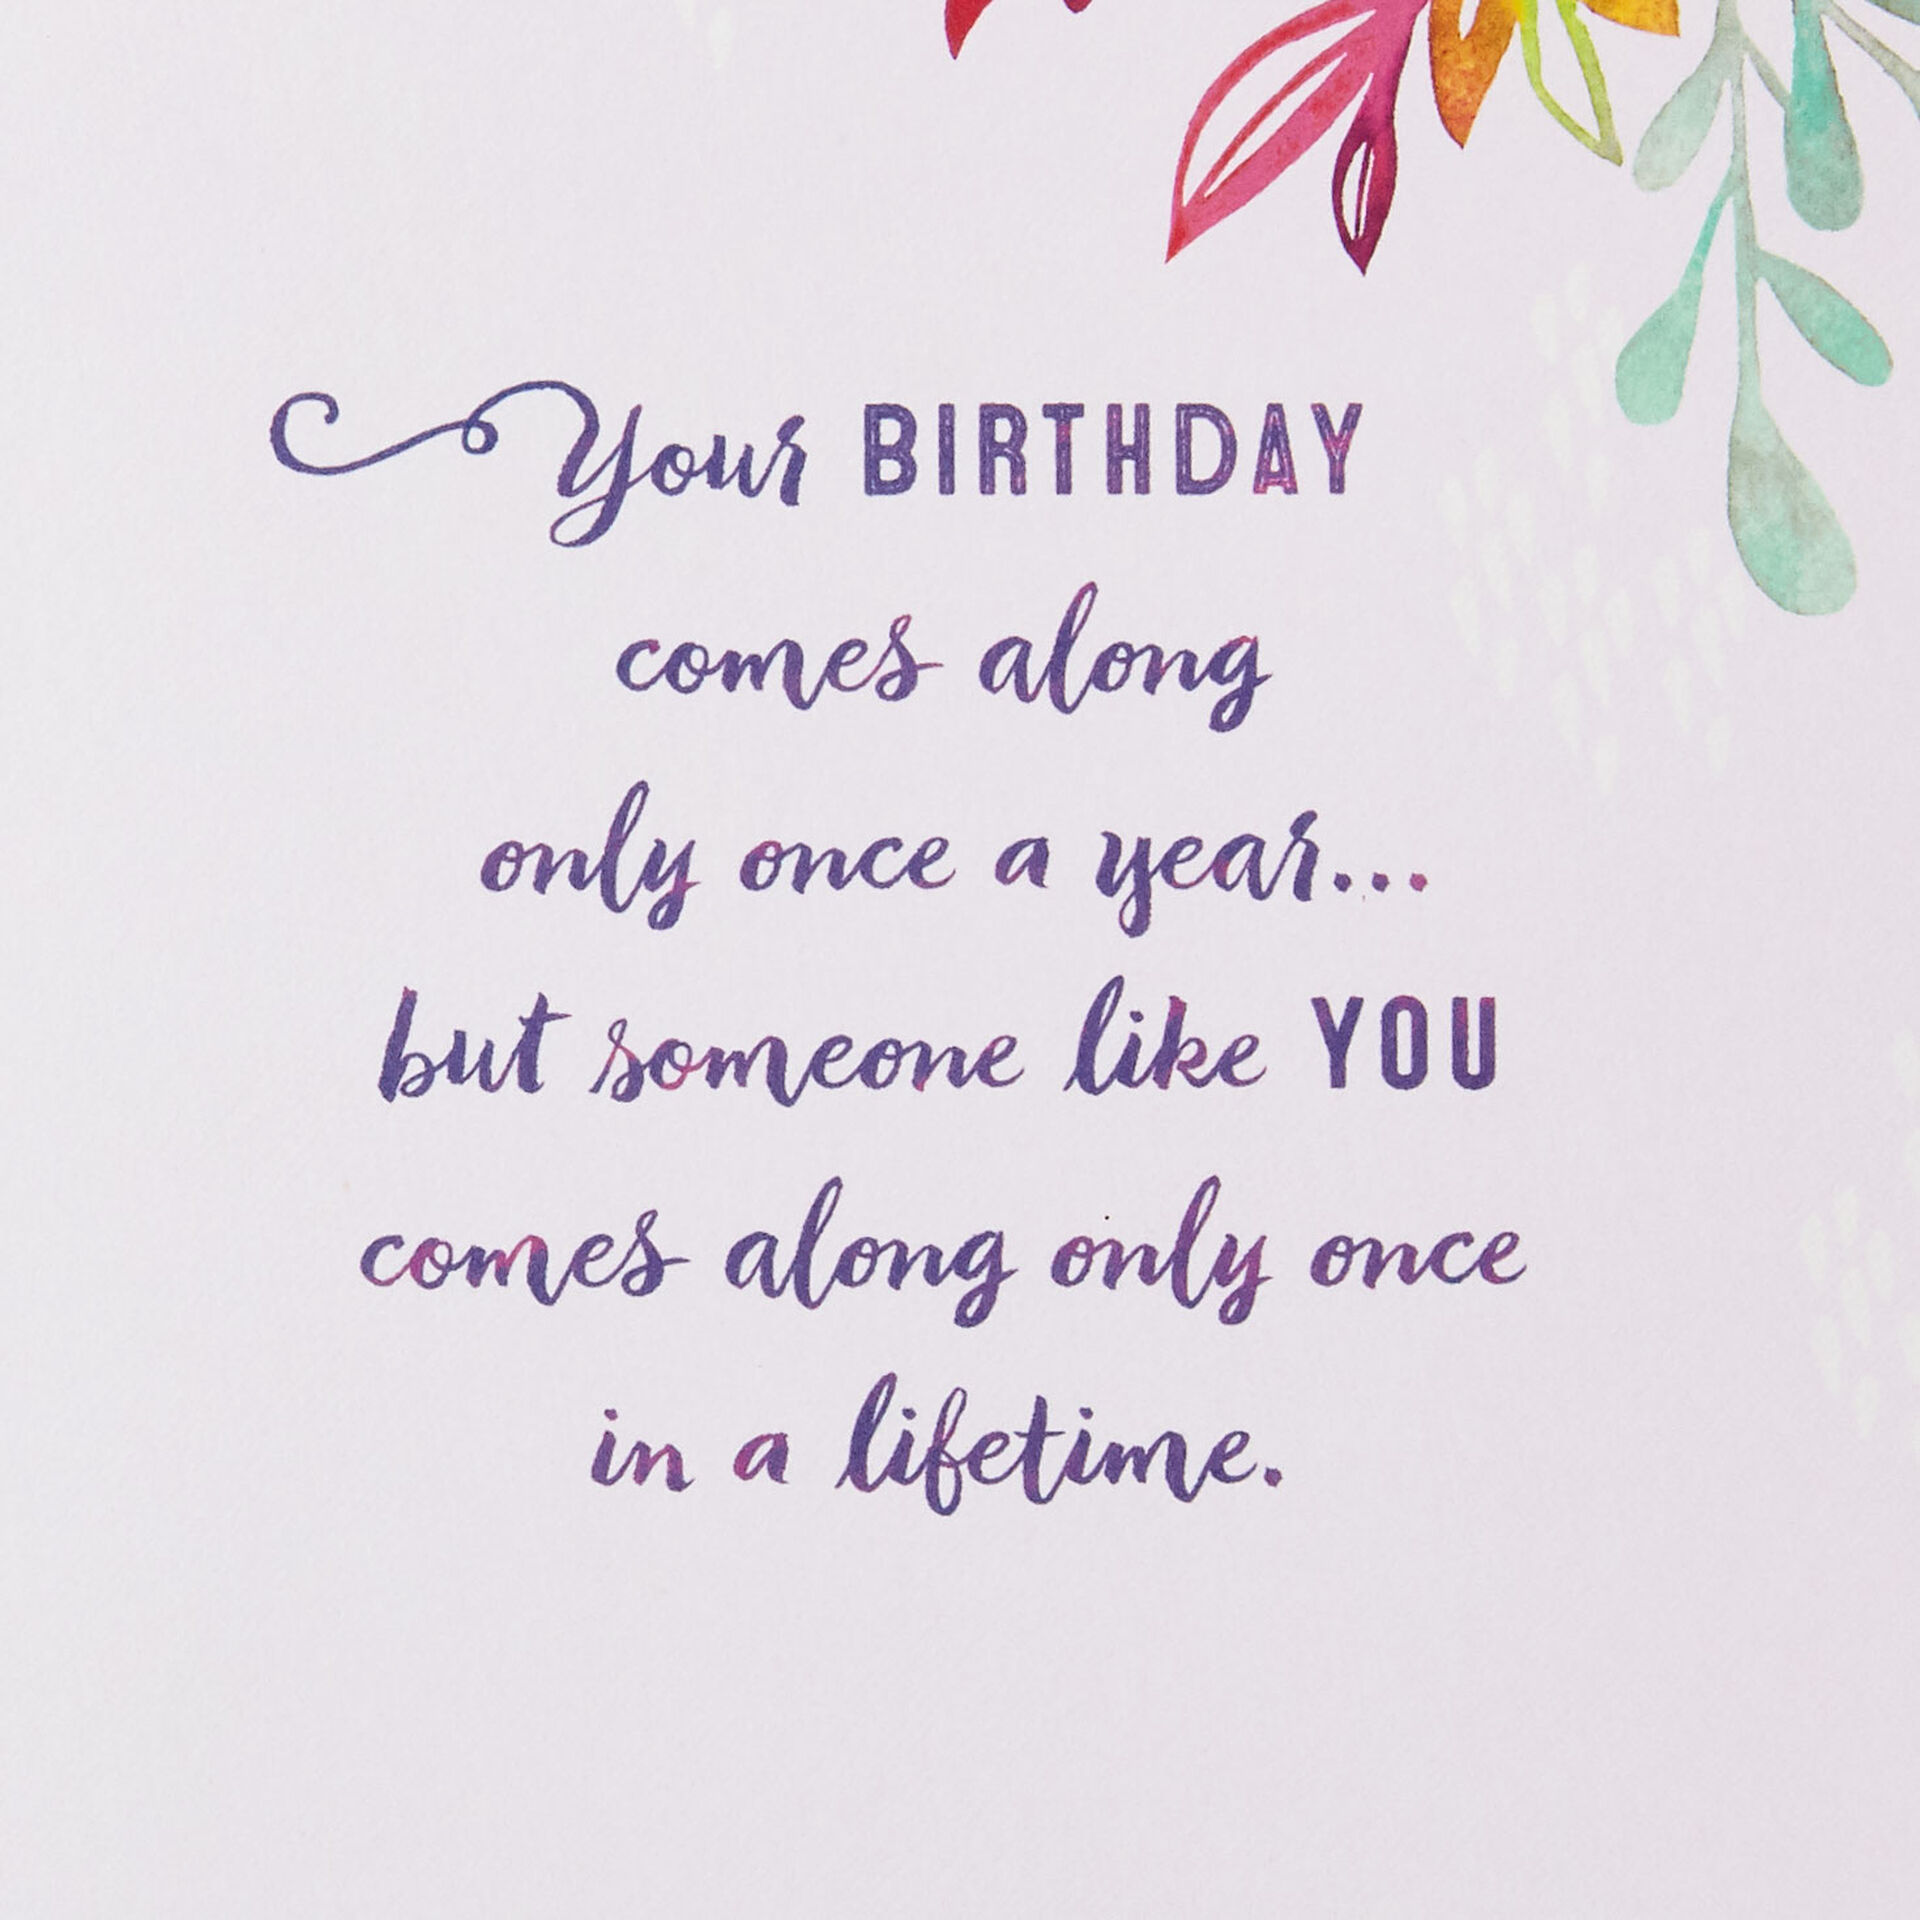 Bright-Flower-Illustrations-Birthday-Card-for-Her_599HBD3307_02